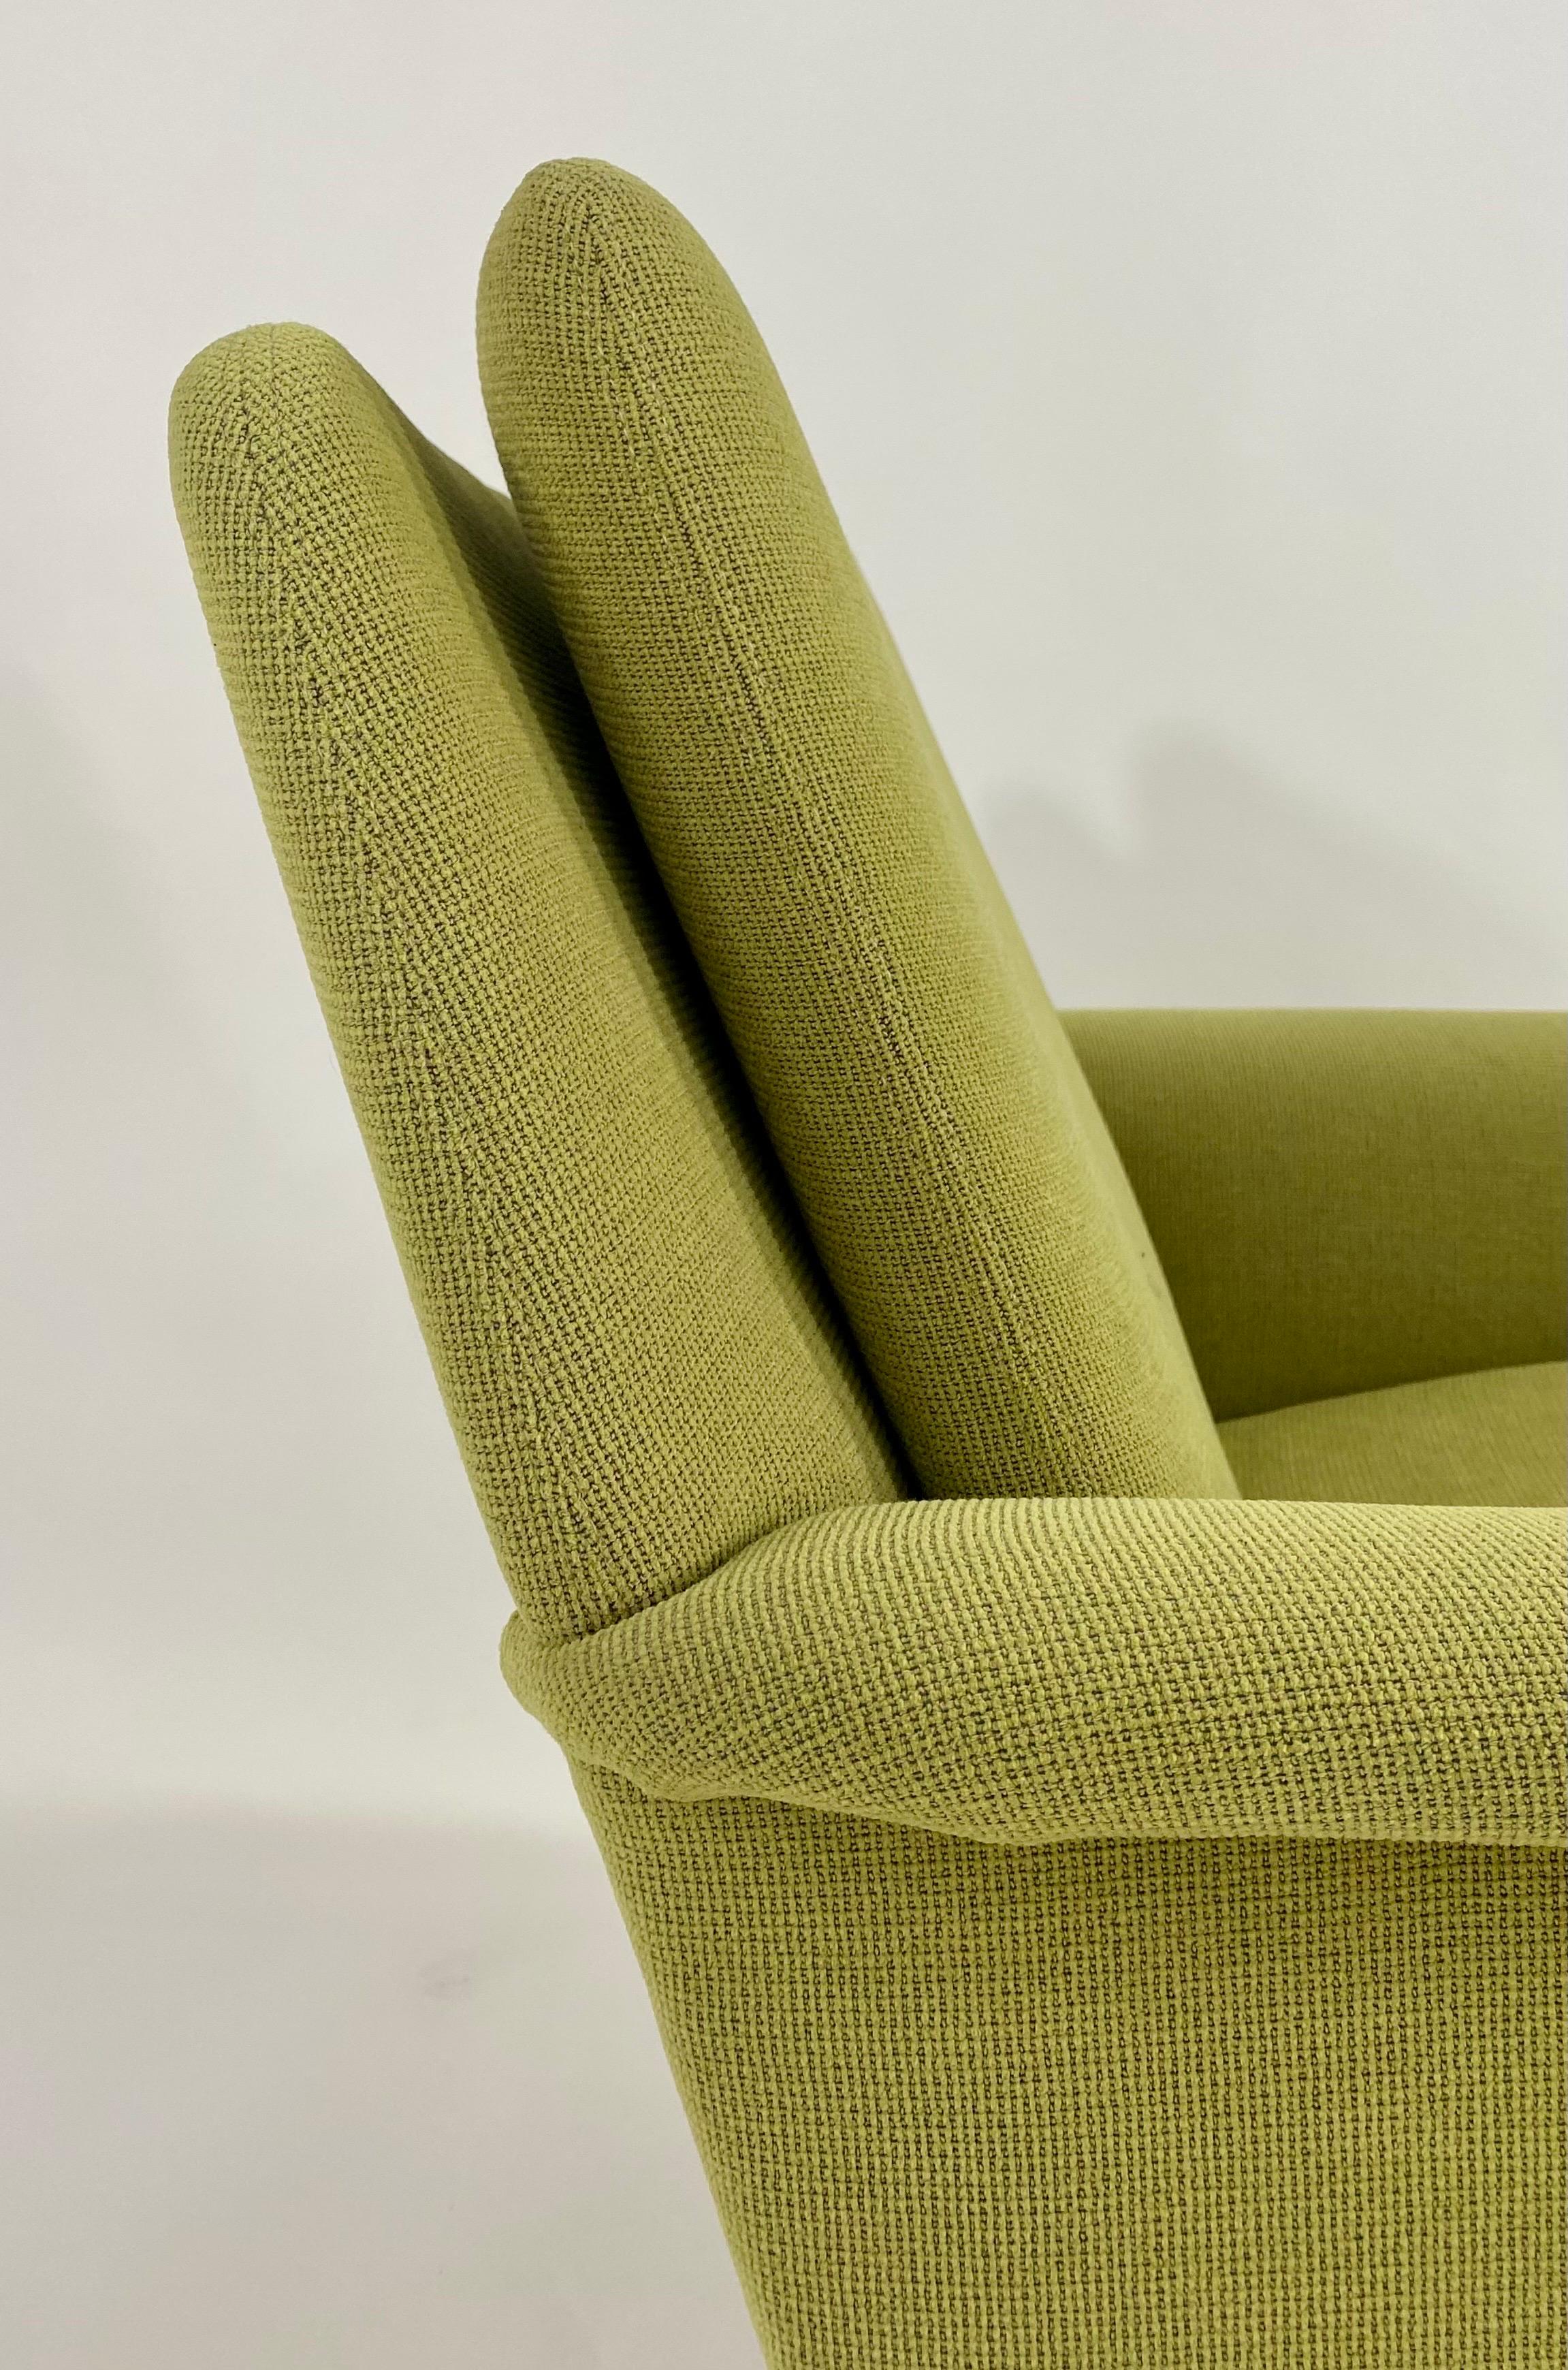 Folke Ohlsson for Fritz Hansen MCM Lounge Chair in Green Upholstery, a Pair For Sale 4